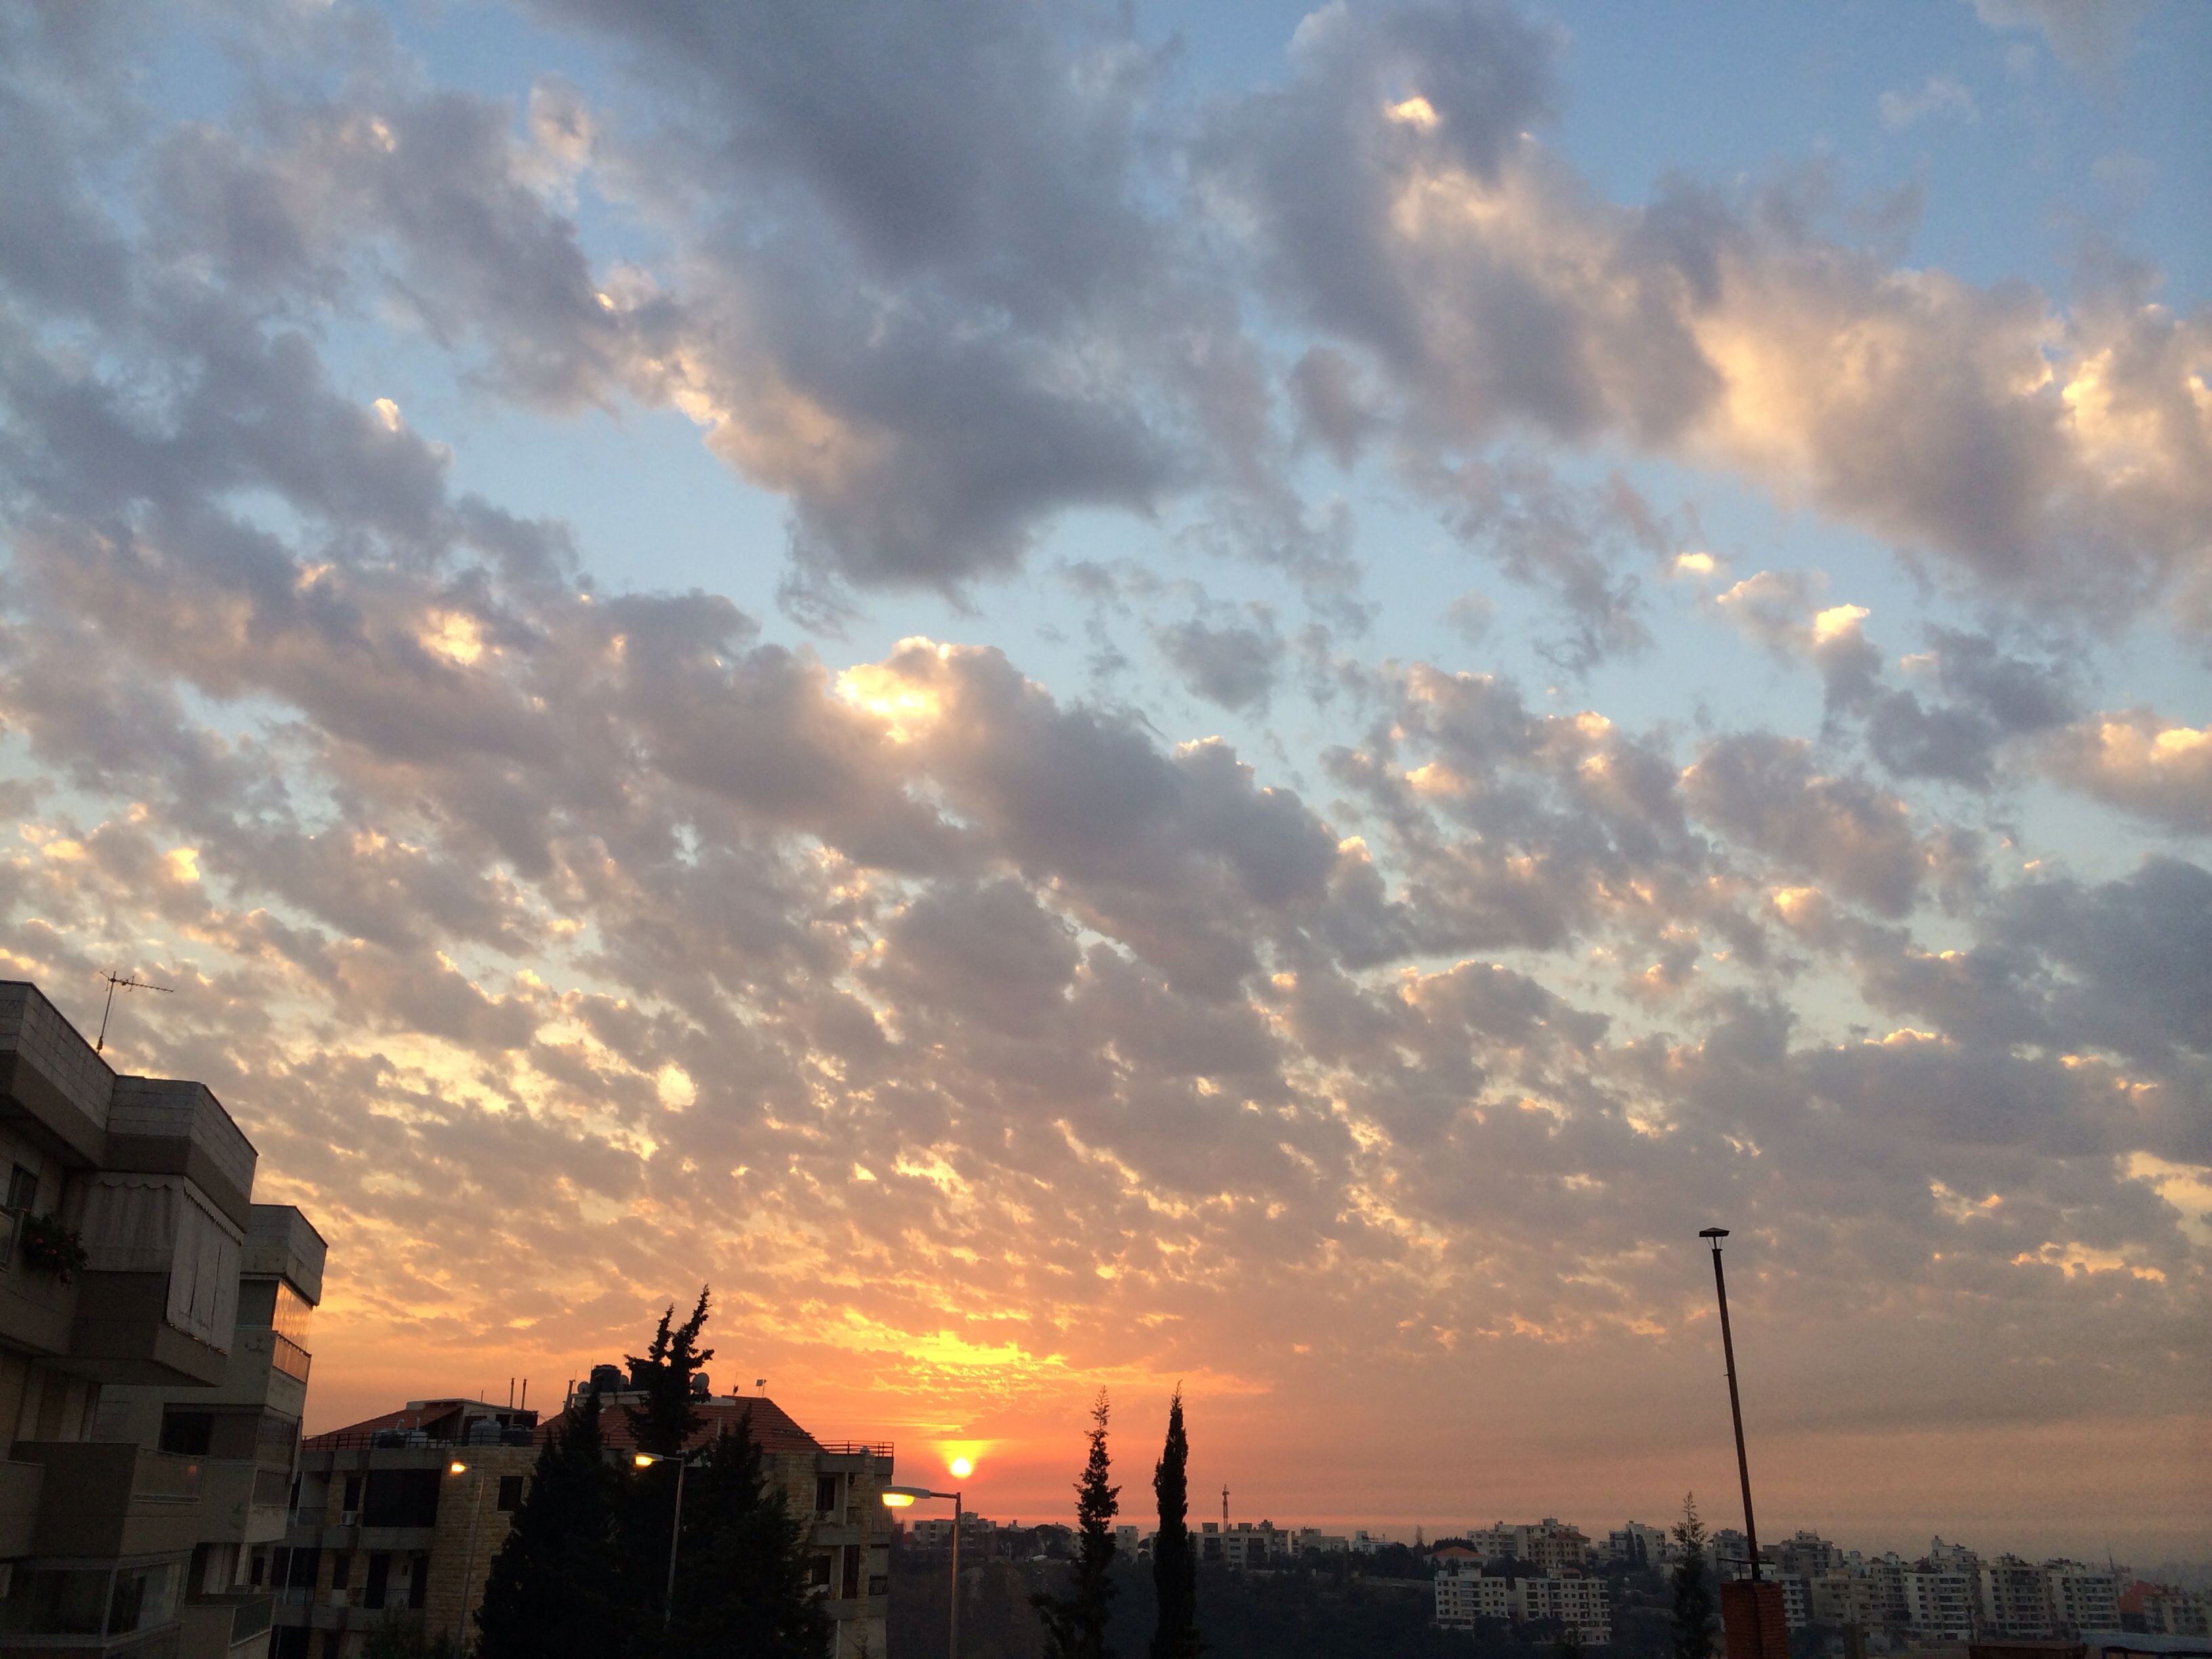 Sunset in Lebanon on a cloudy day #sunset #clouds | Lebanon ...